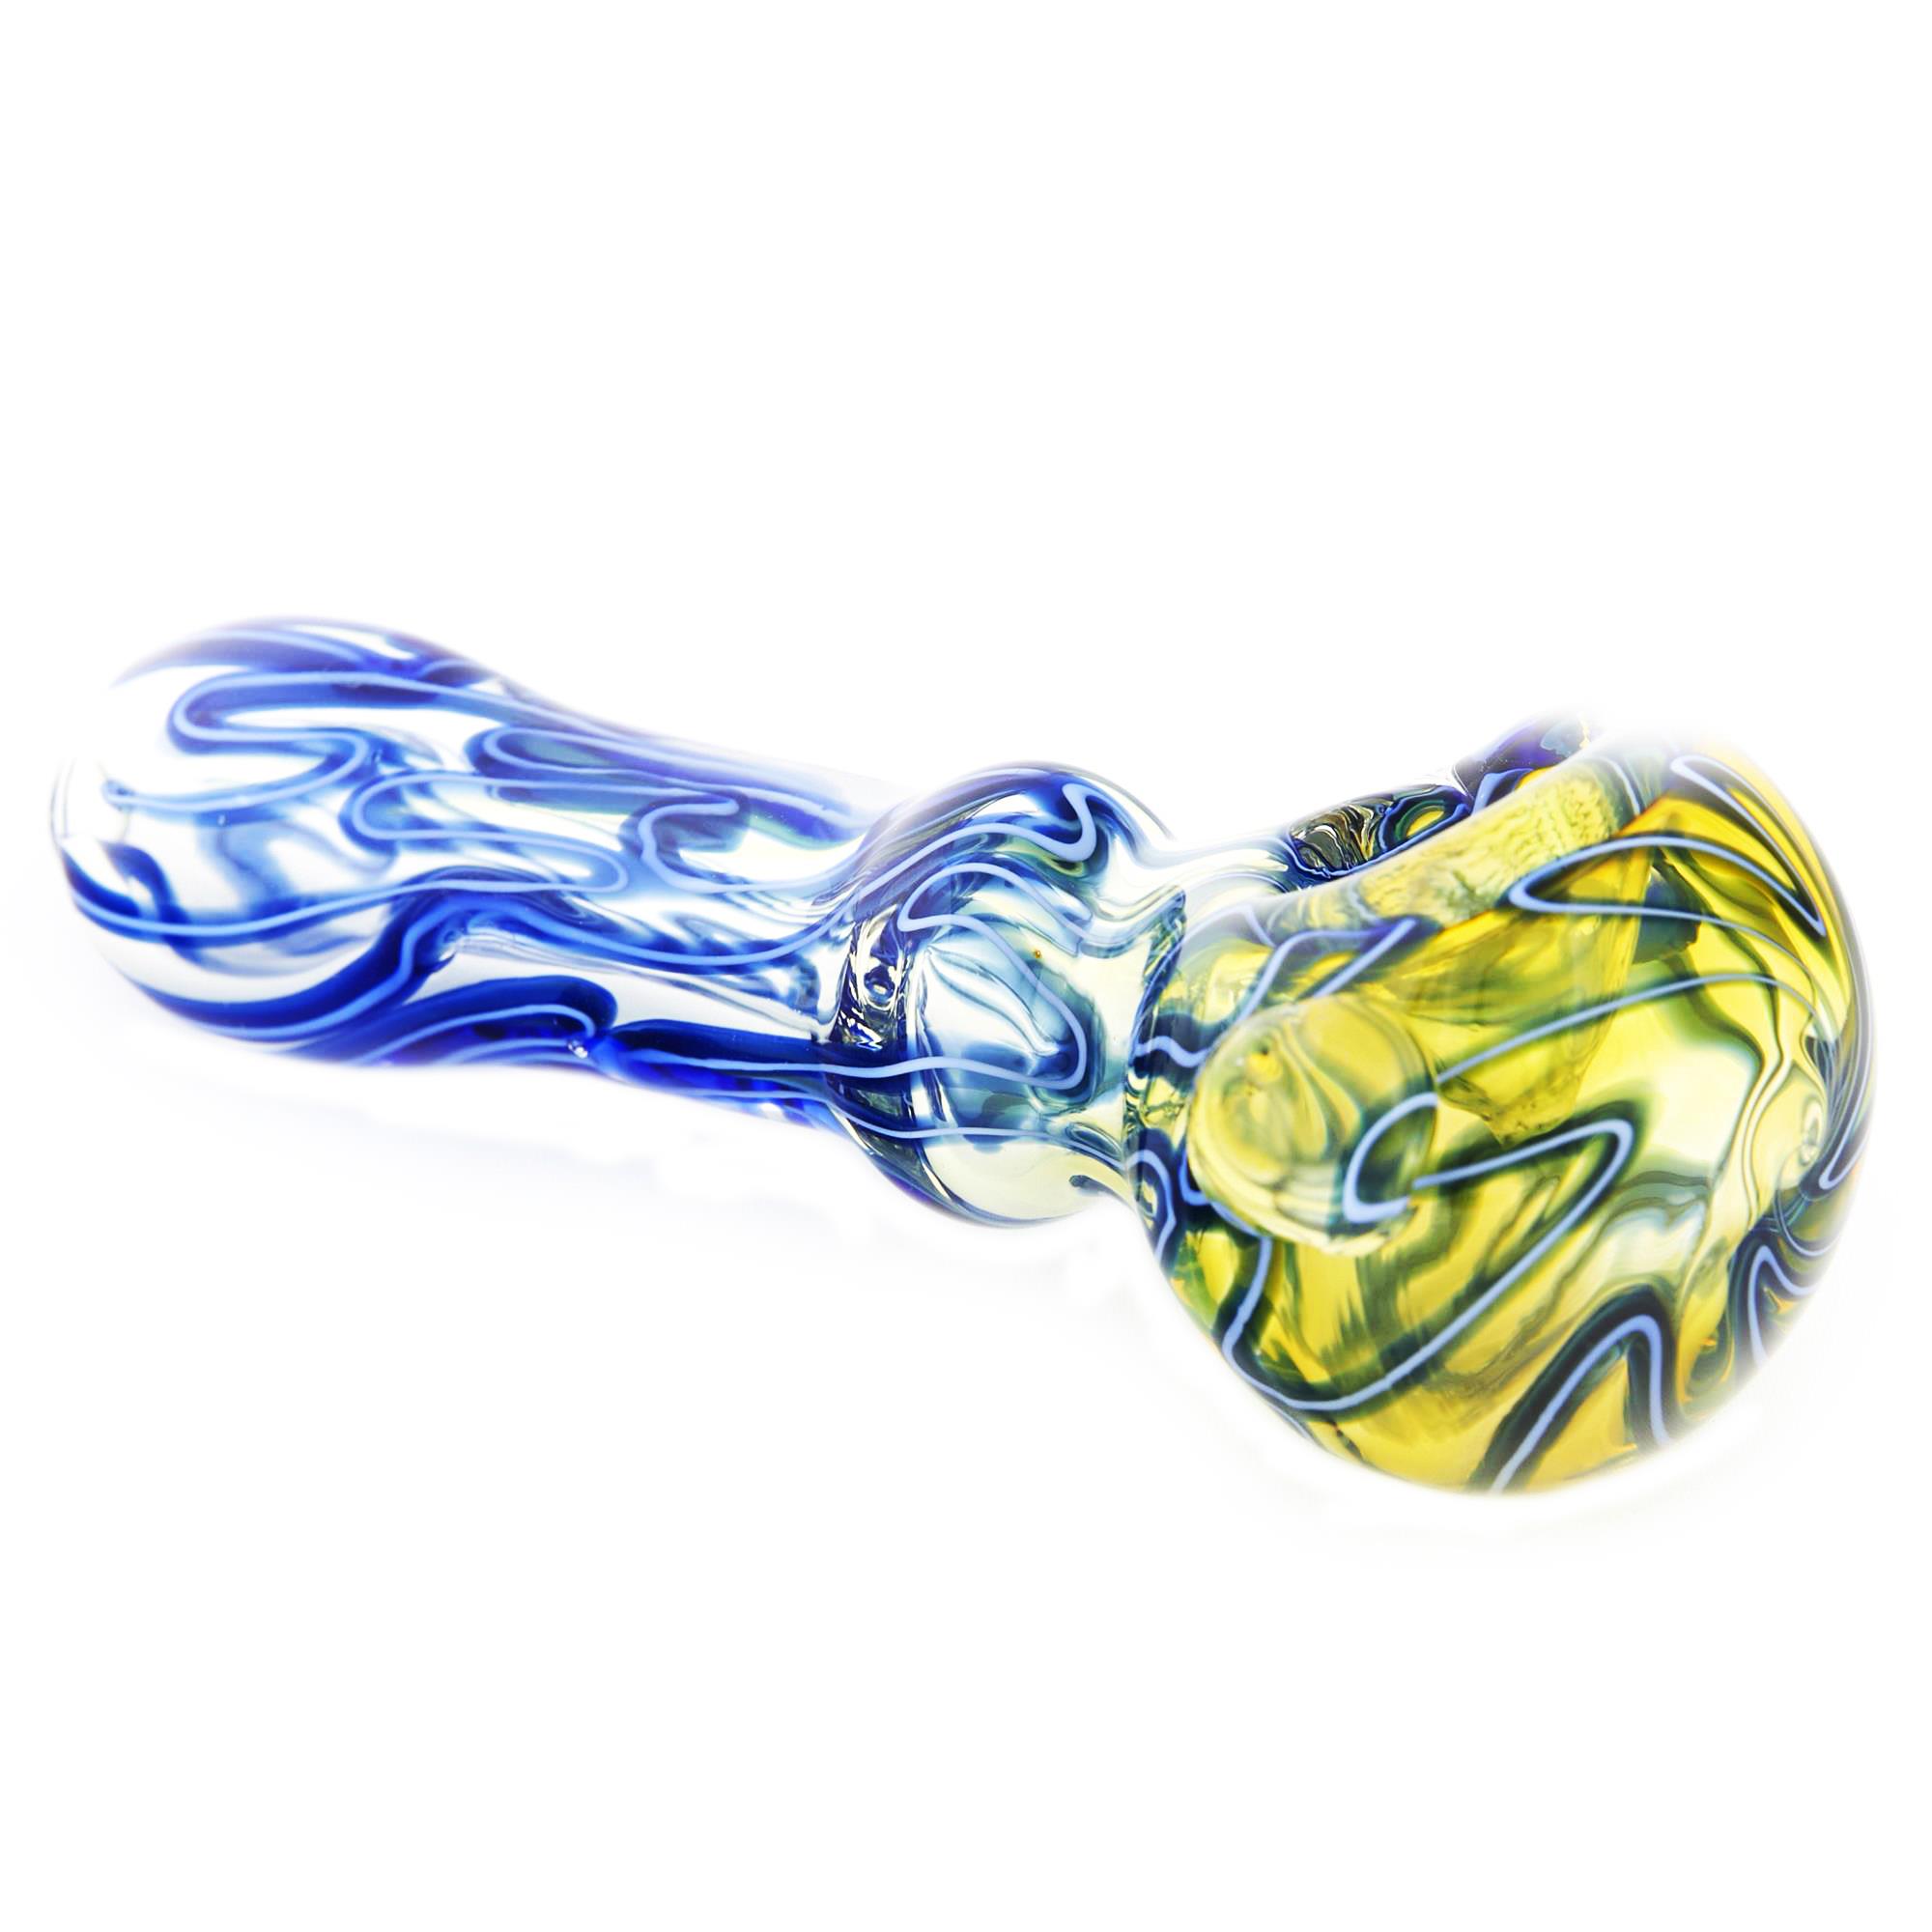 WEEDONT CARE SPOON PIPE